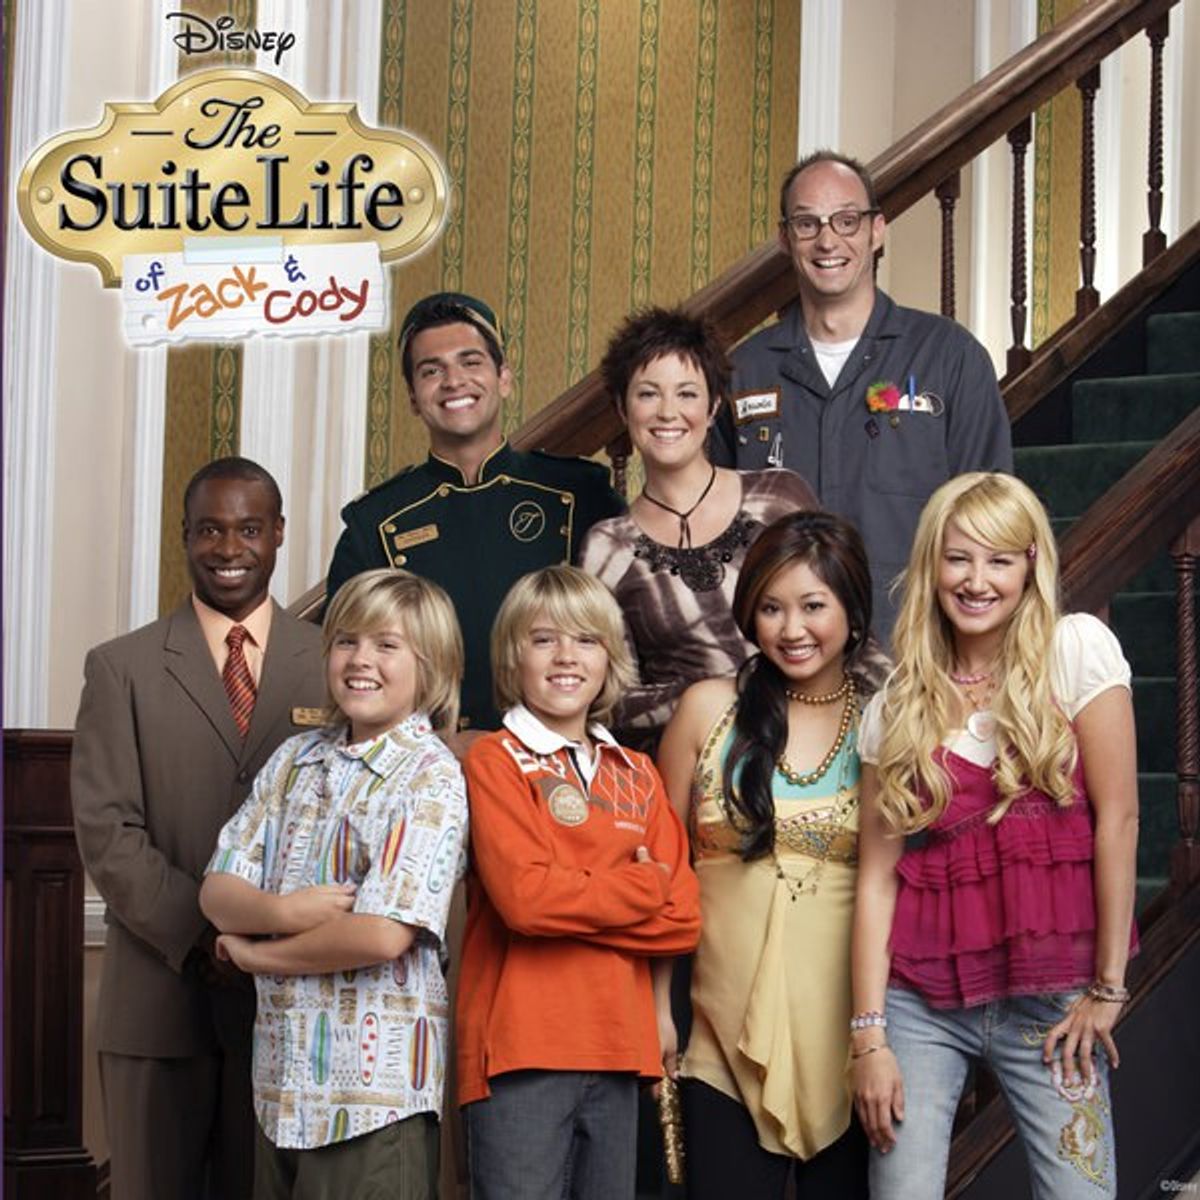 What I Learned from Disney's The Suite Life of Zack & Cody